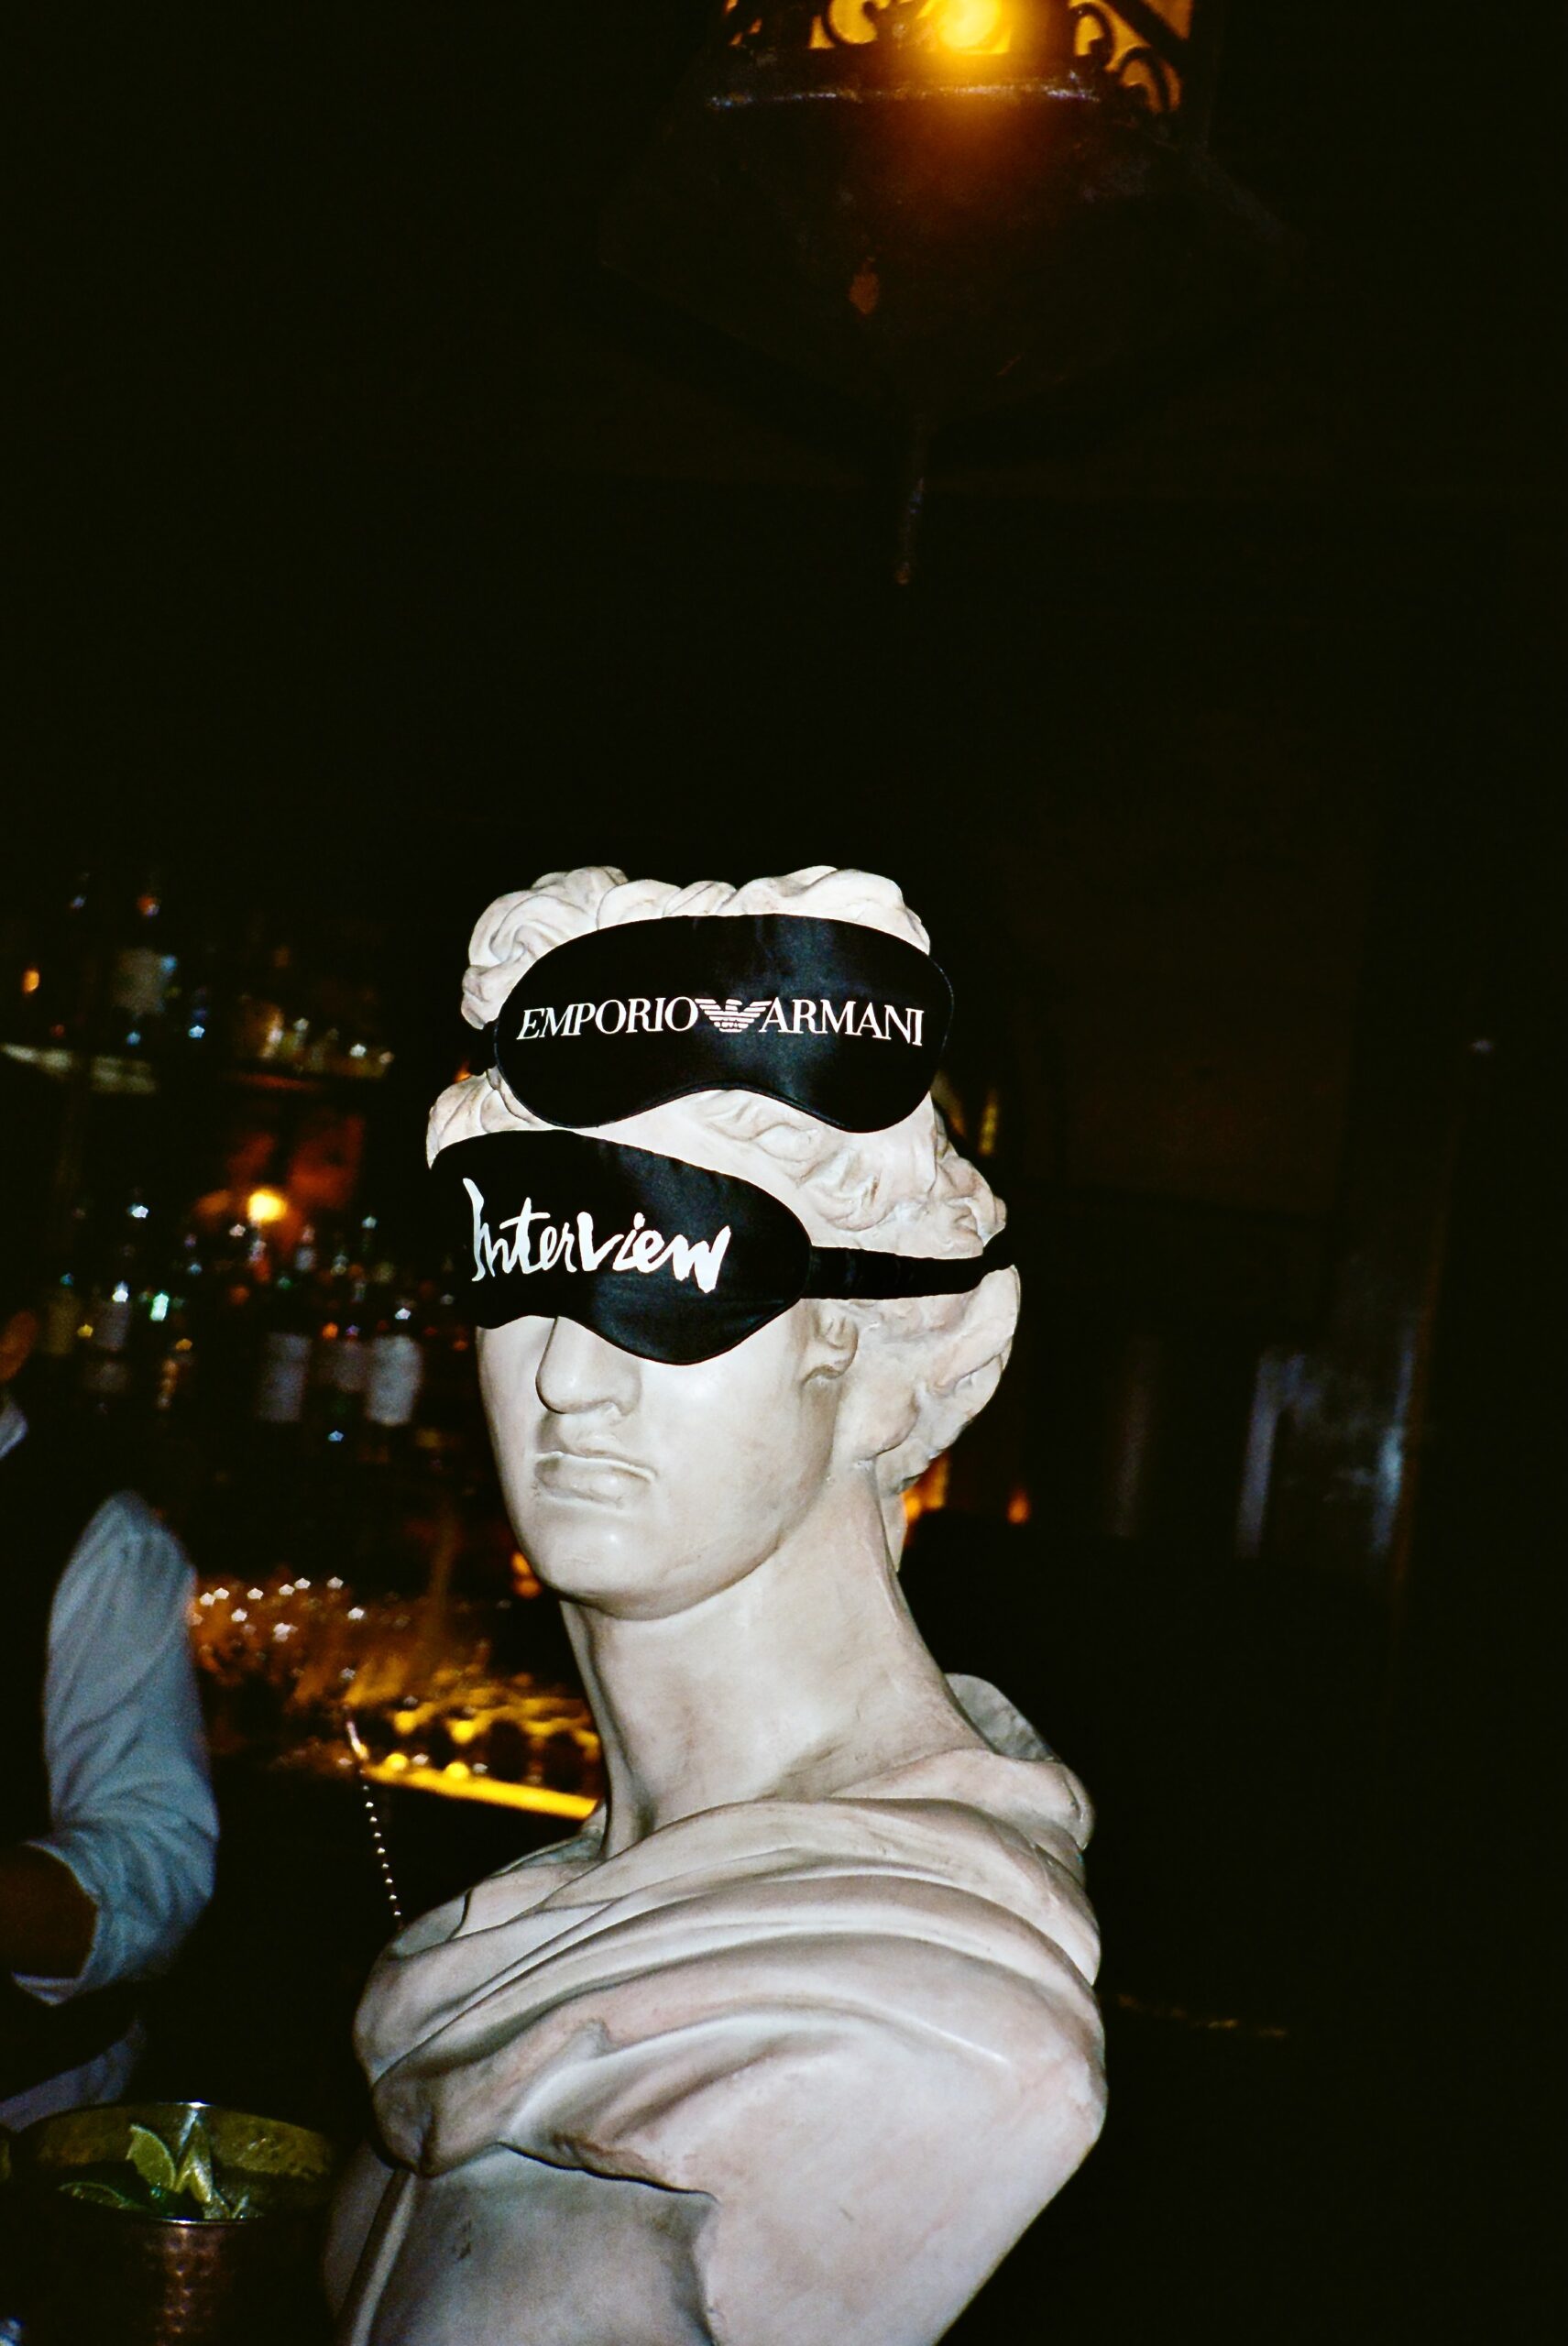 Everyone's Talking About the Interview x Emporio Armani Party